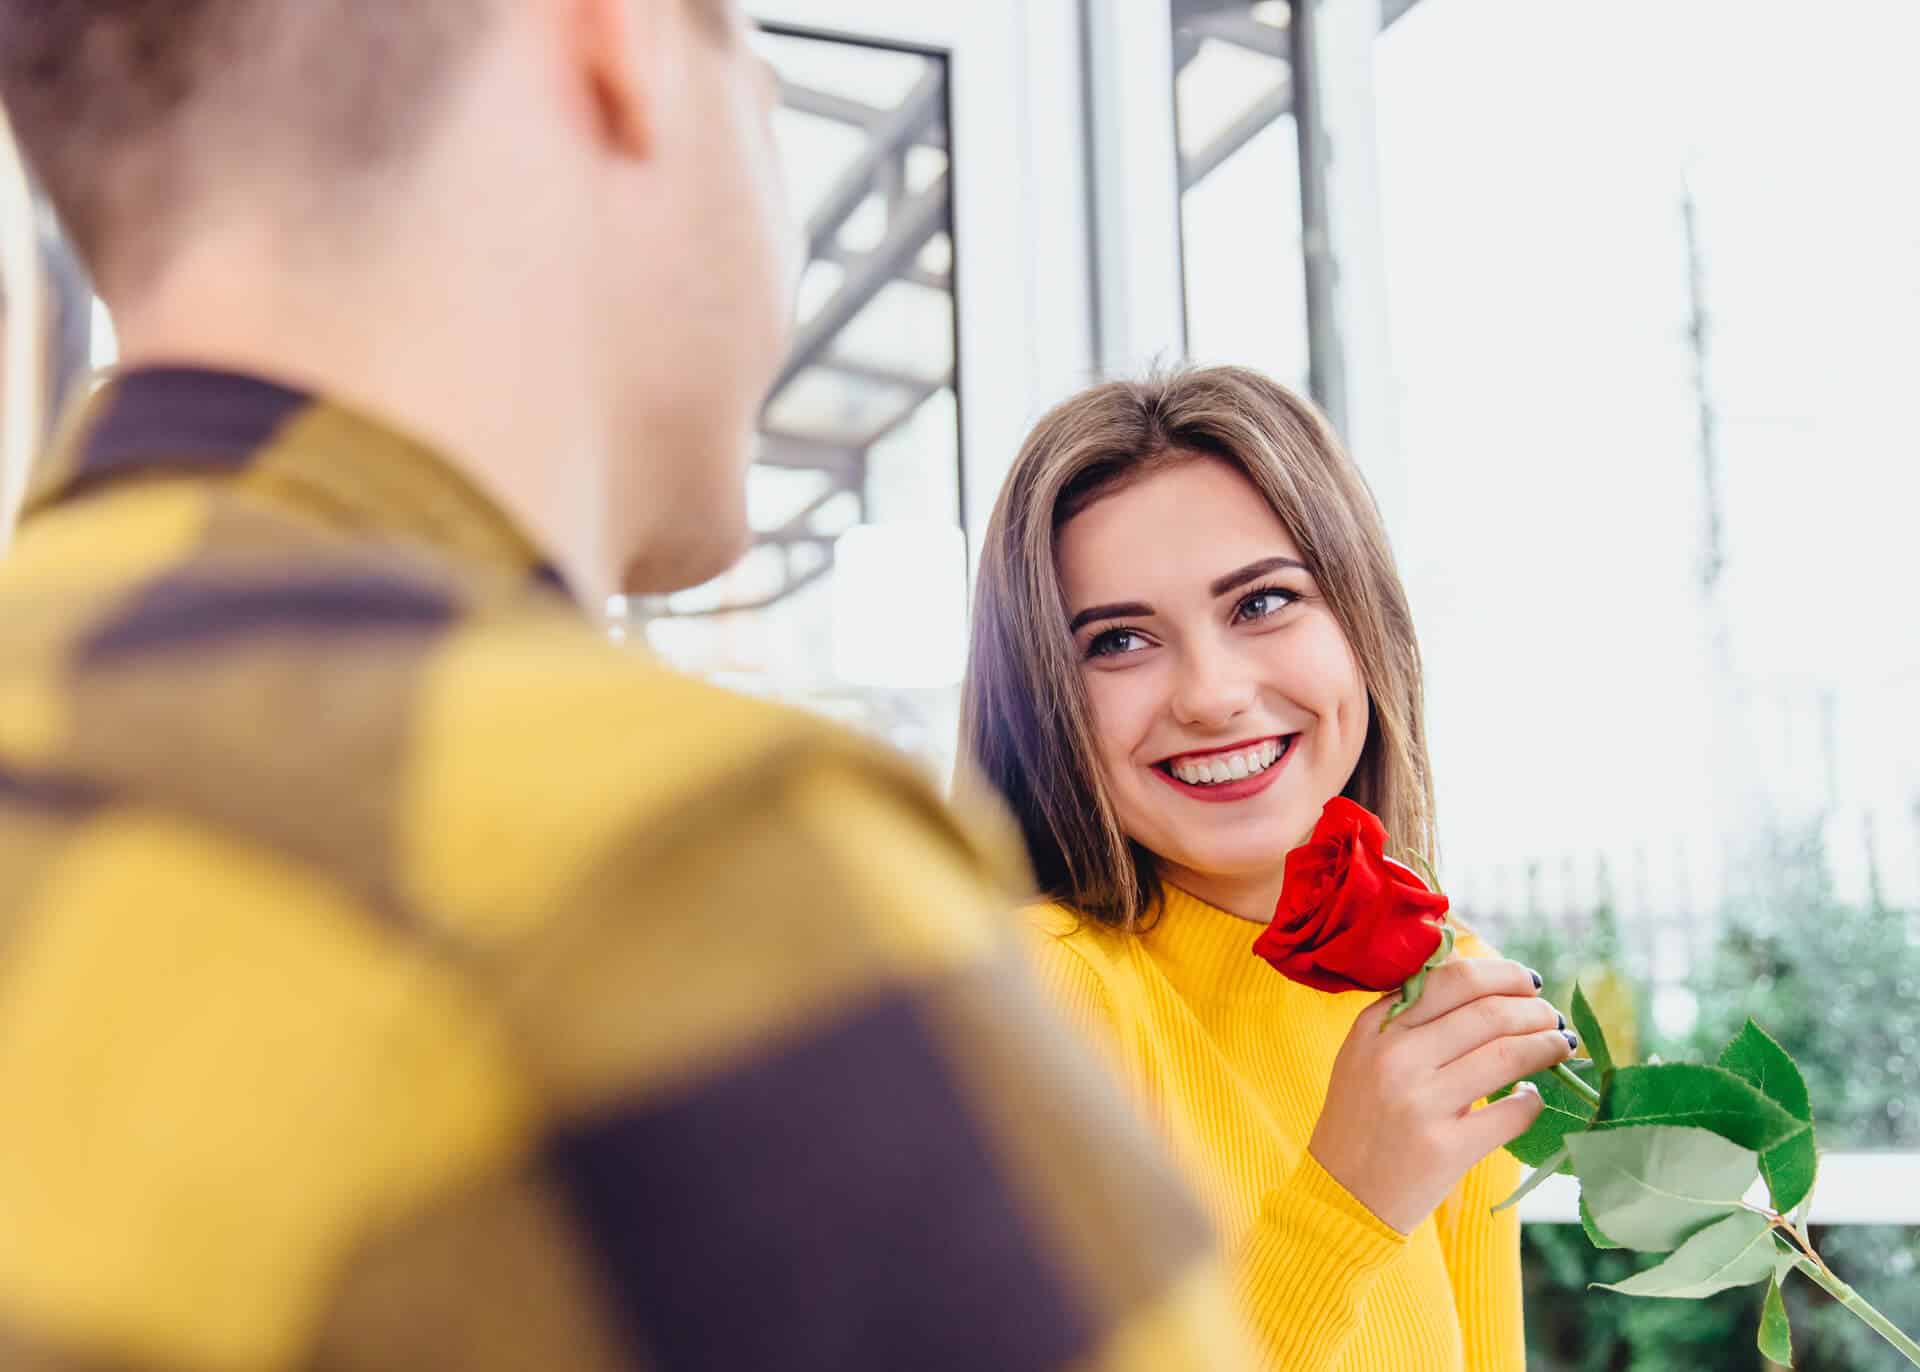 guy gifting a flower to a girl on a date